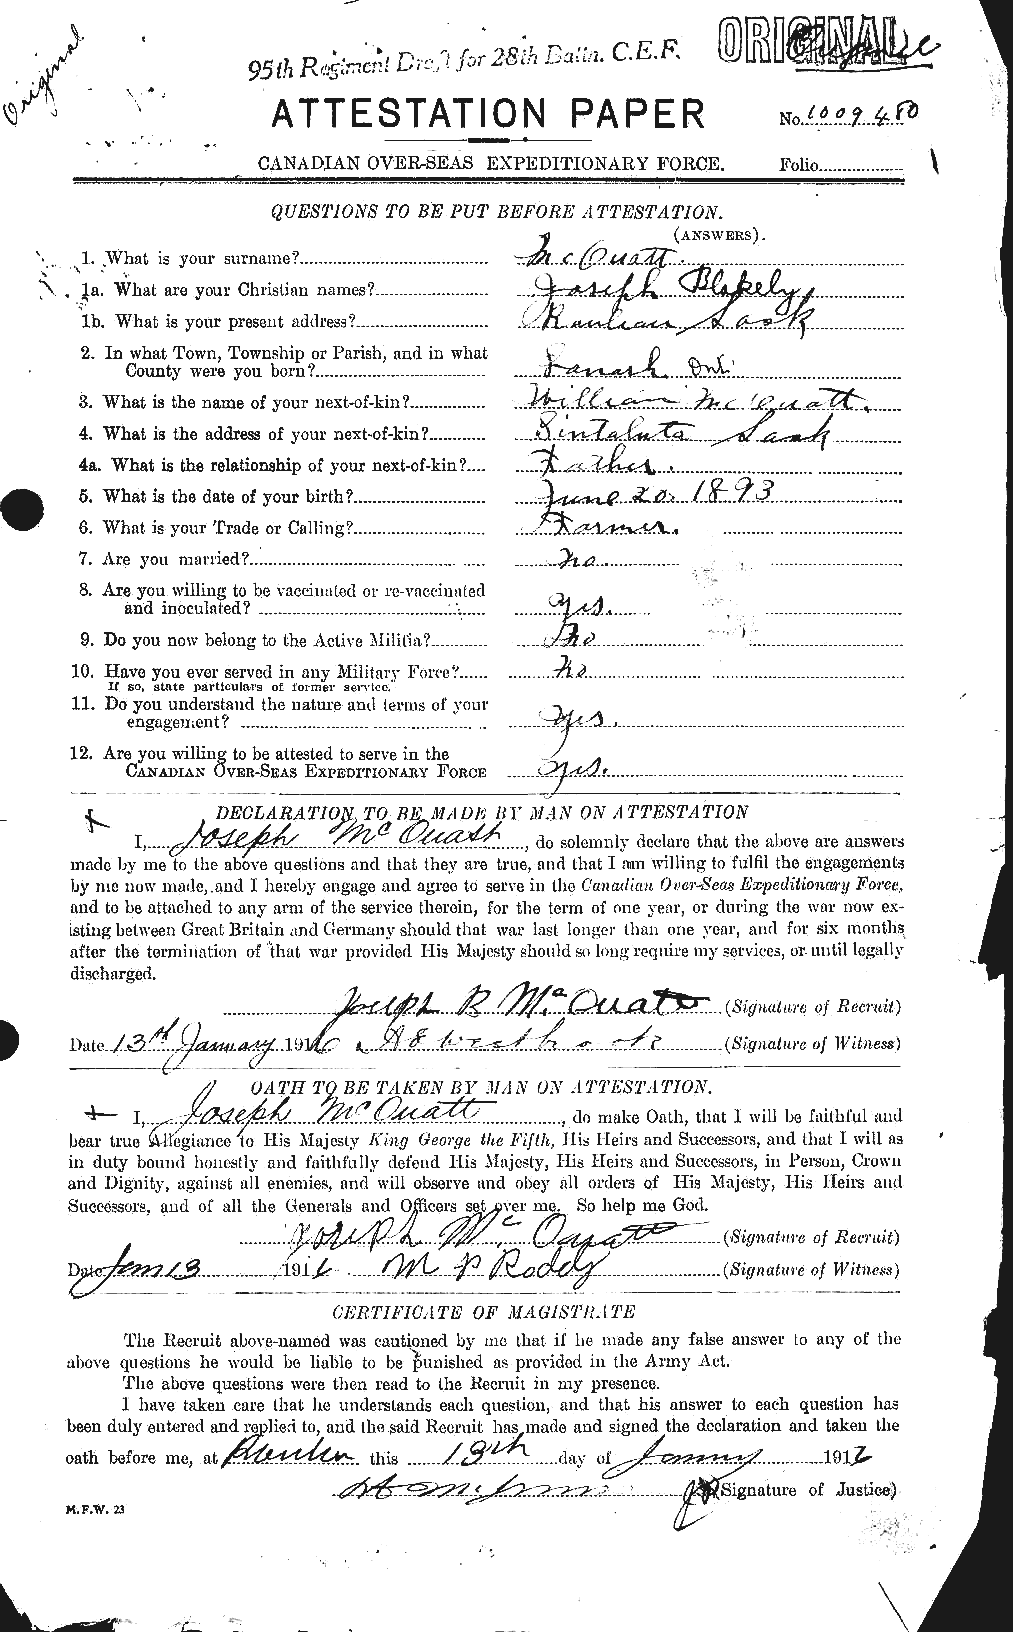 Personnel Records of the First World War - CEF 542049a